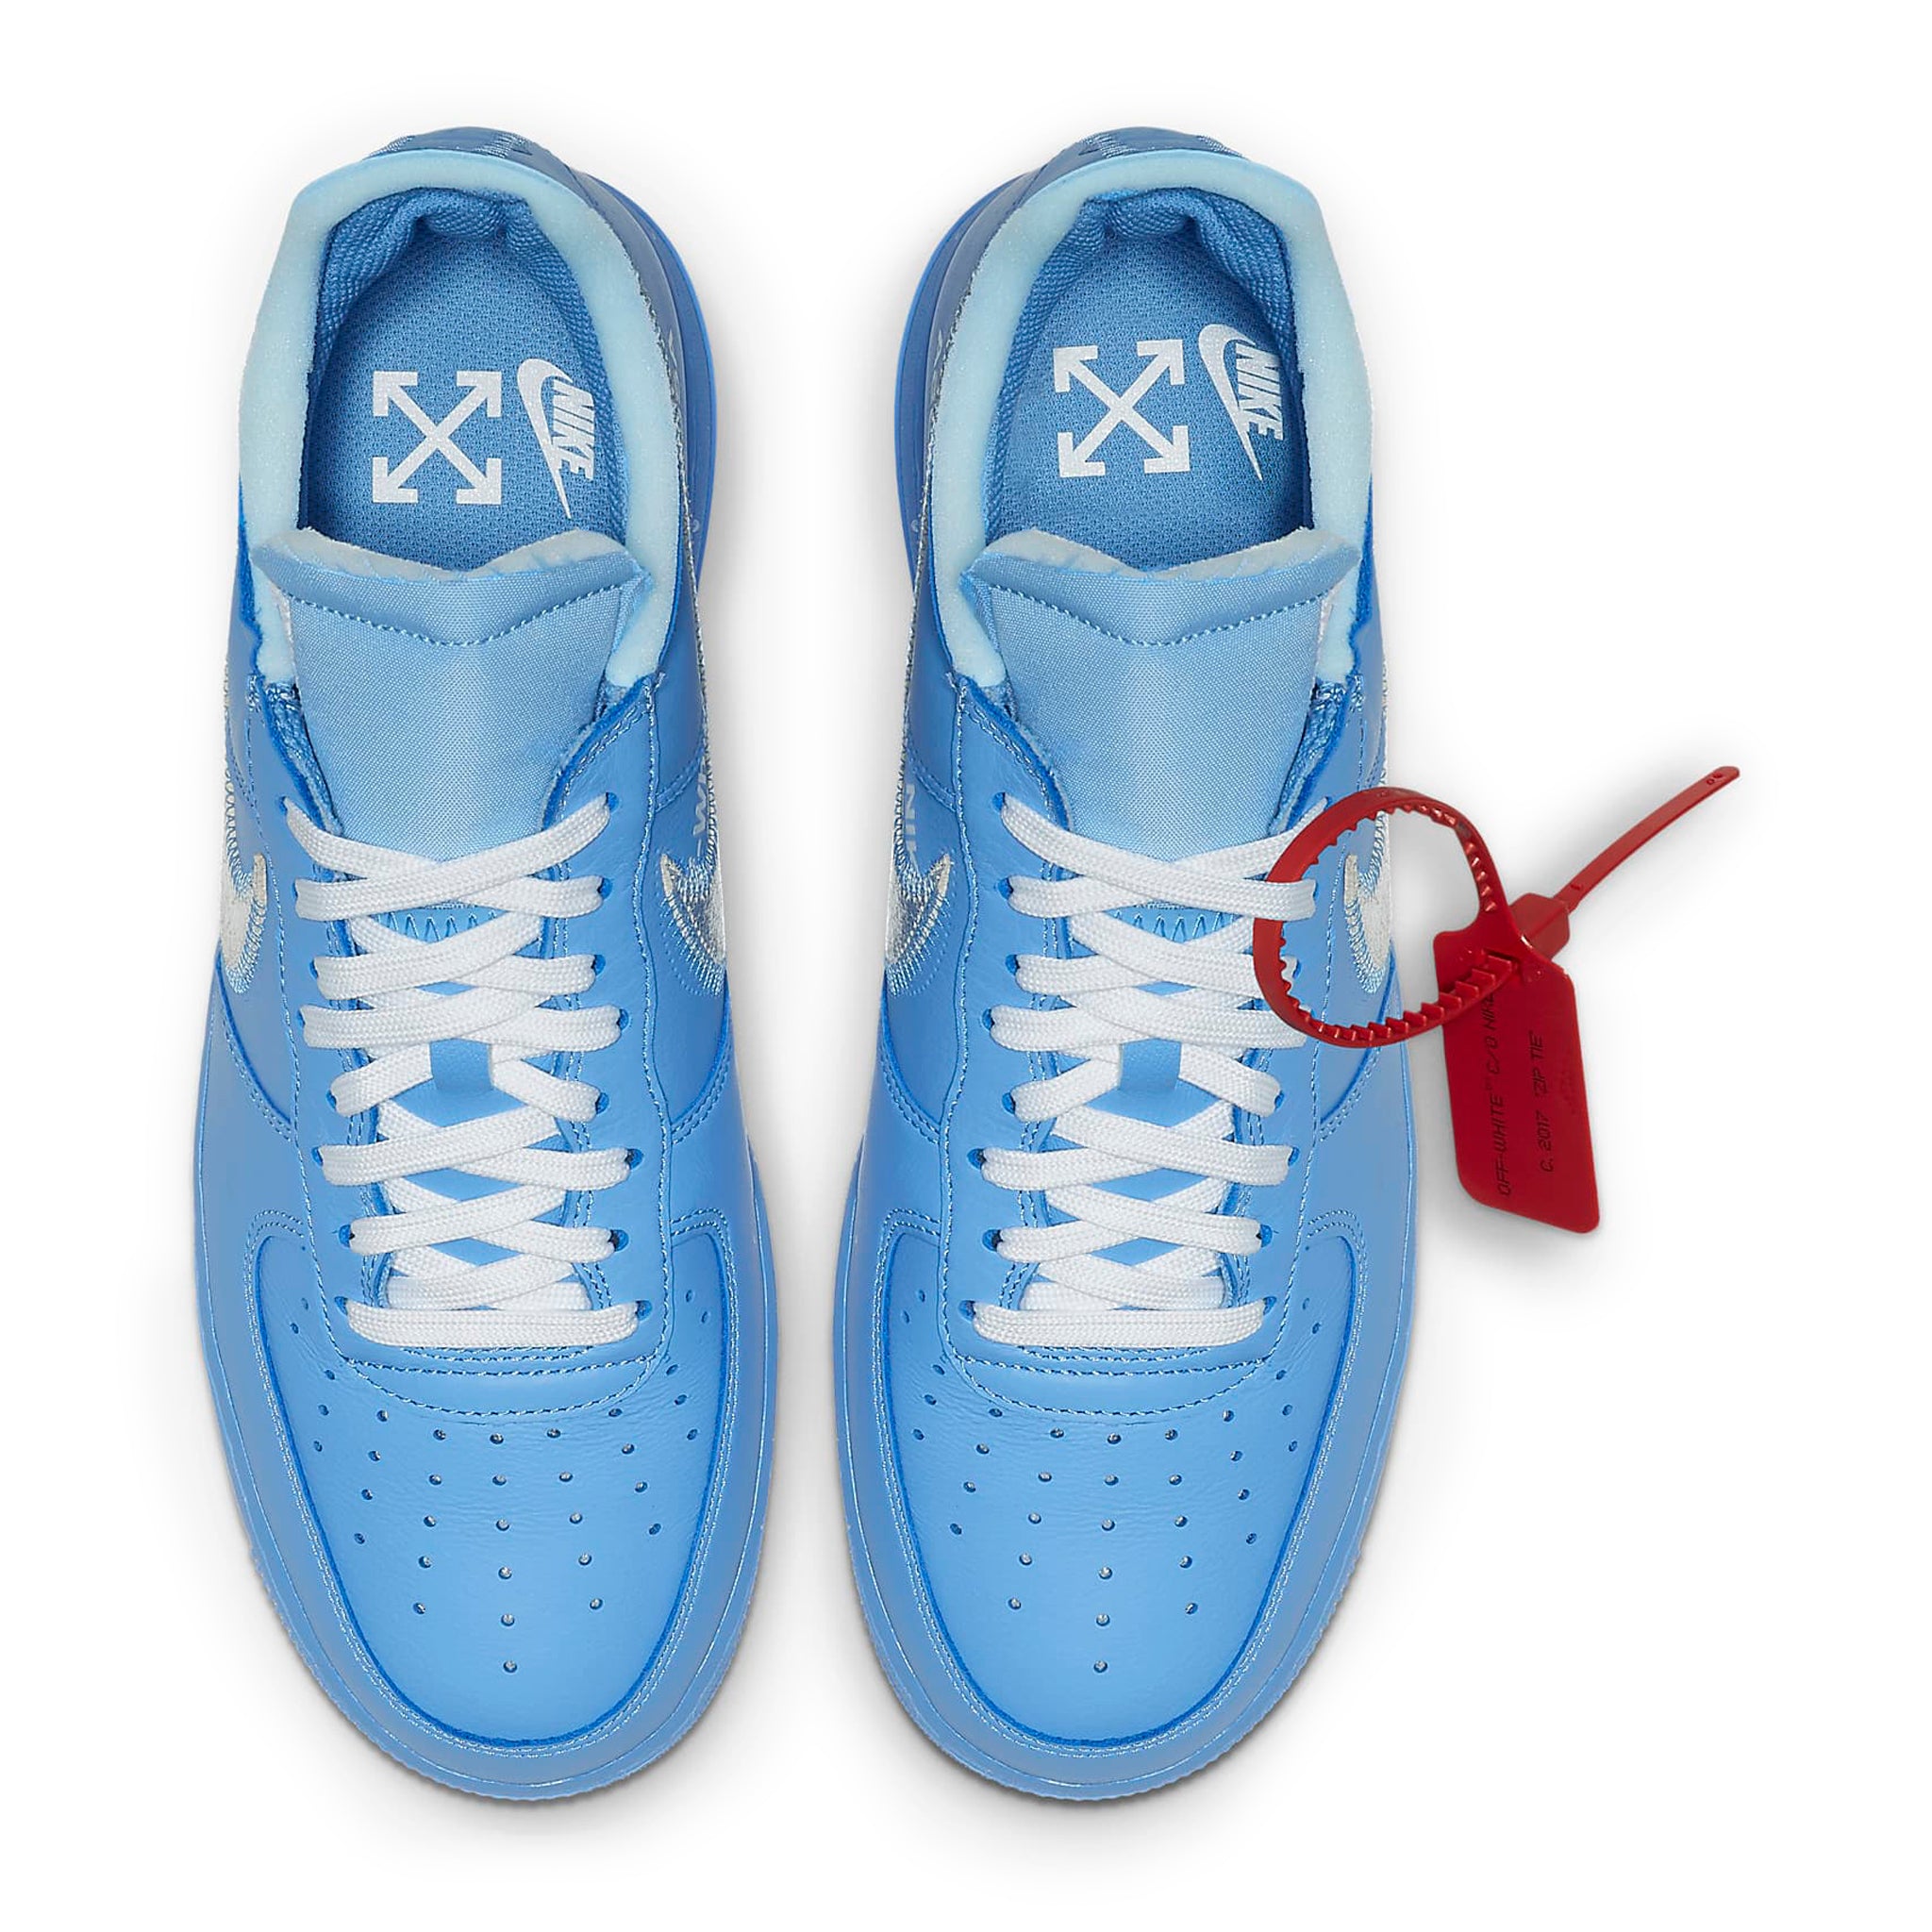 Top down view of Nike x Off White Air Force 1 Low MCA University Blue CI1173-400